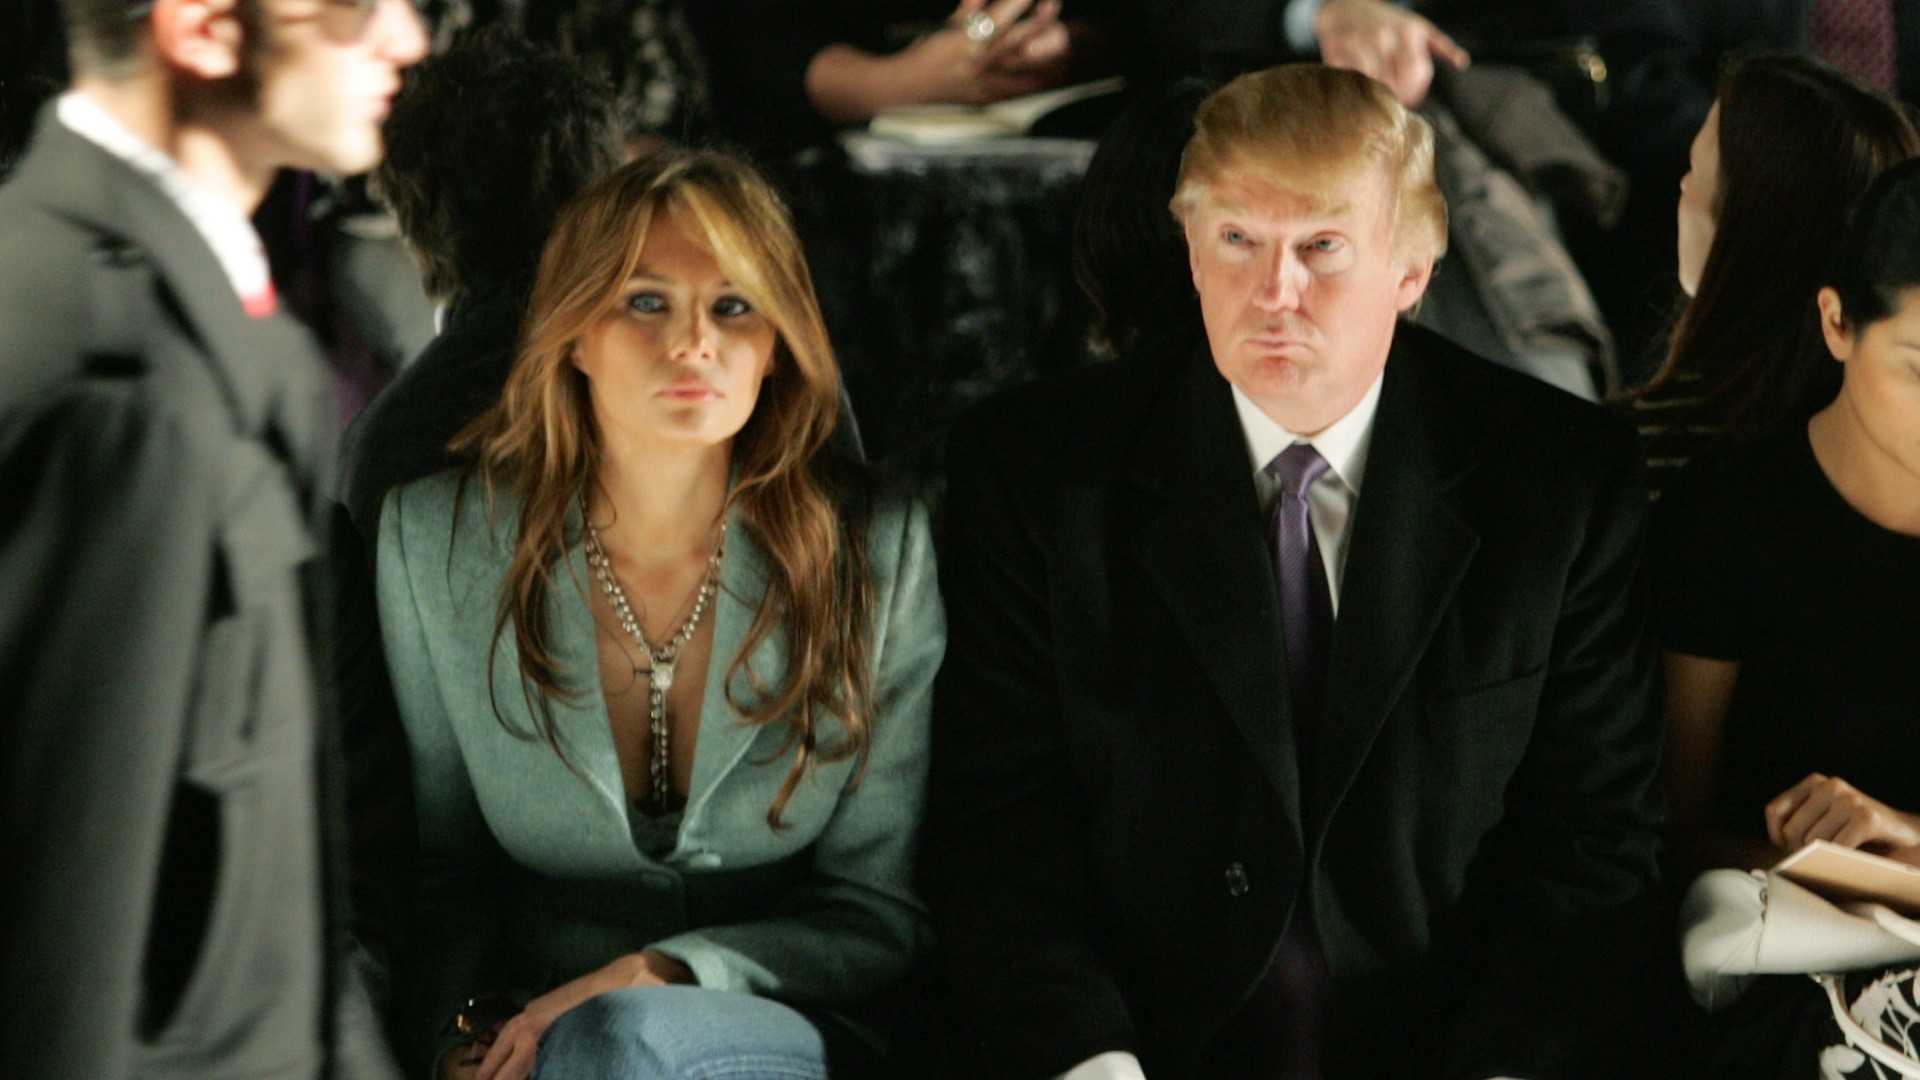 Meet Melania Trump, Donalds third wife and possible first lady – The Washington Post